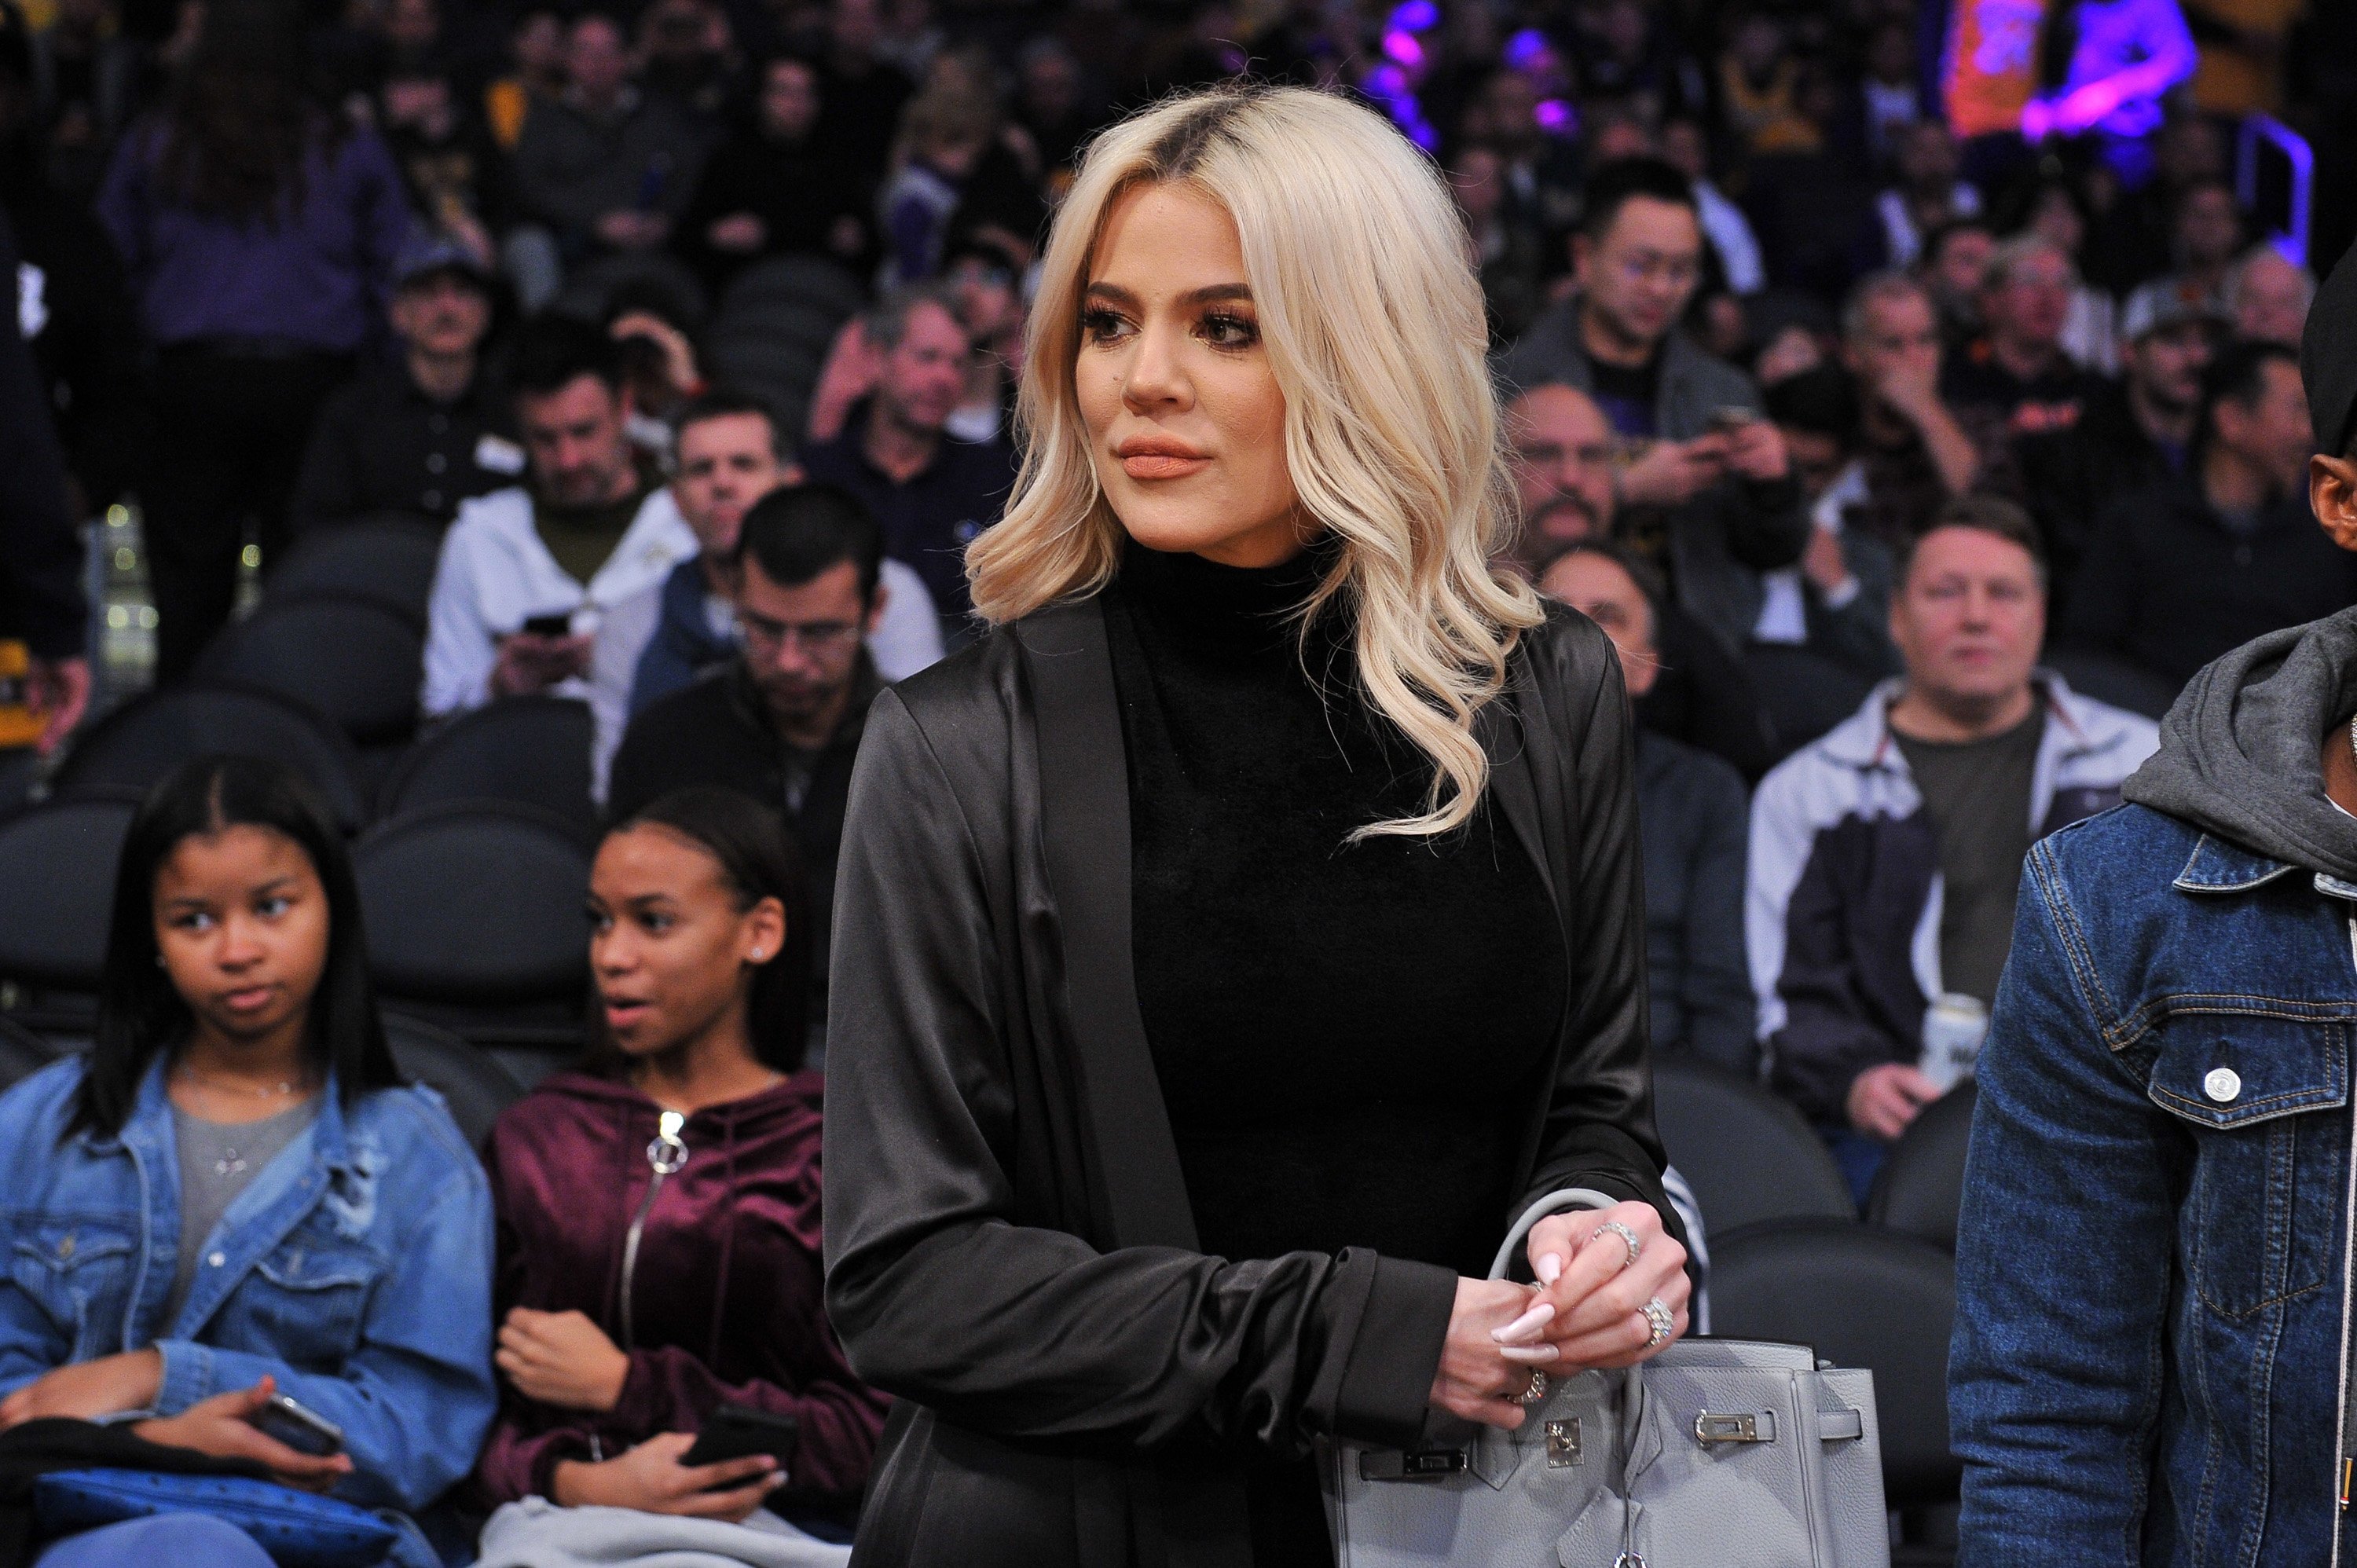 KUWTK star Khloé Kardashian attends the basketball match between the Los Angeles Lakers and the Cleveland Cavaliers in January 2019 in California. | Photo: Getty Images